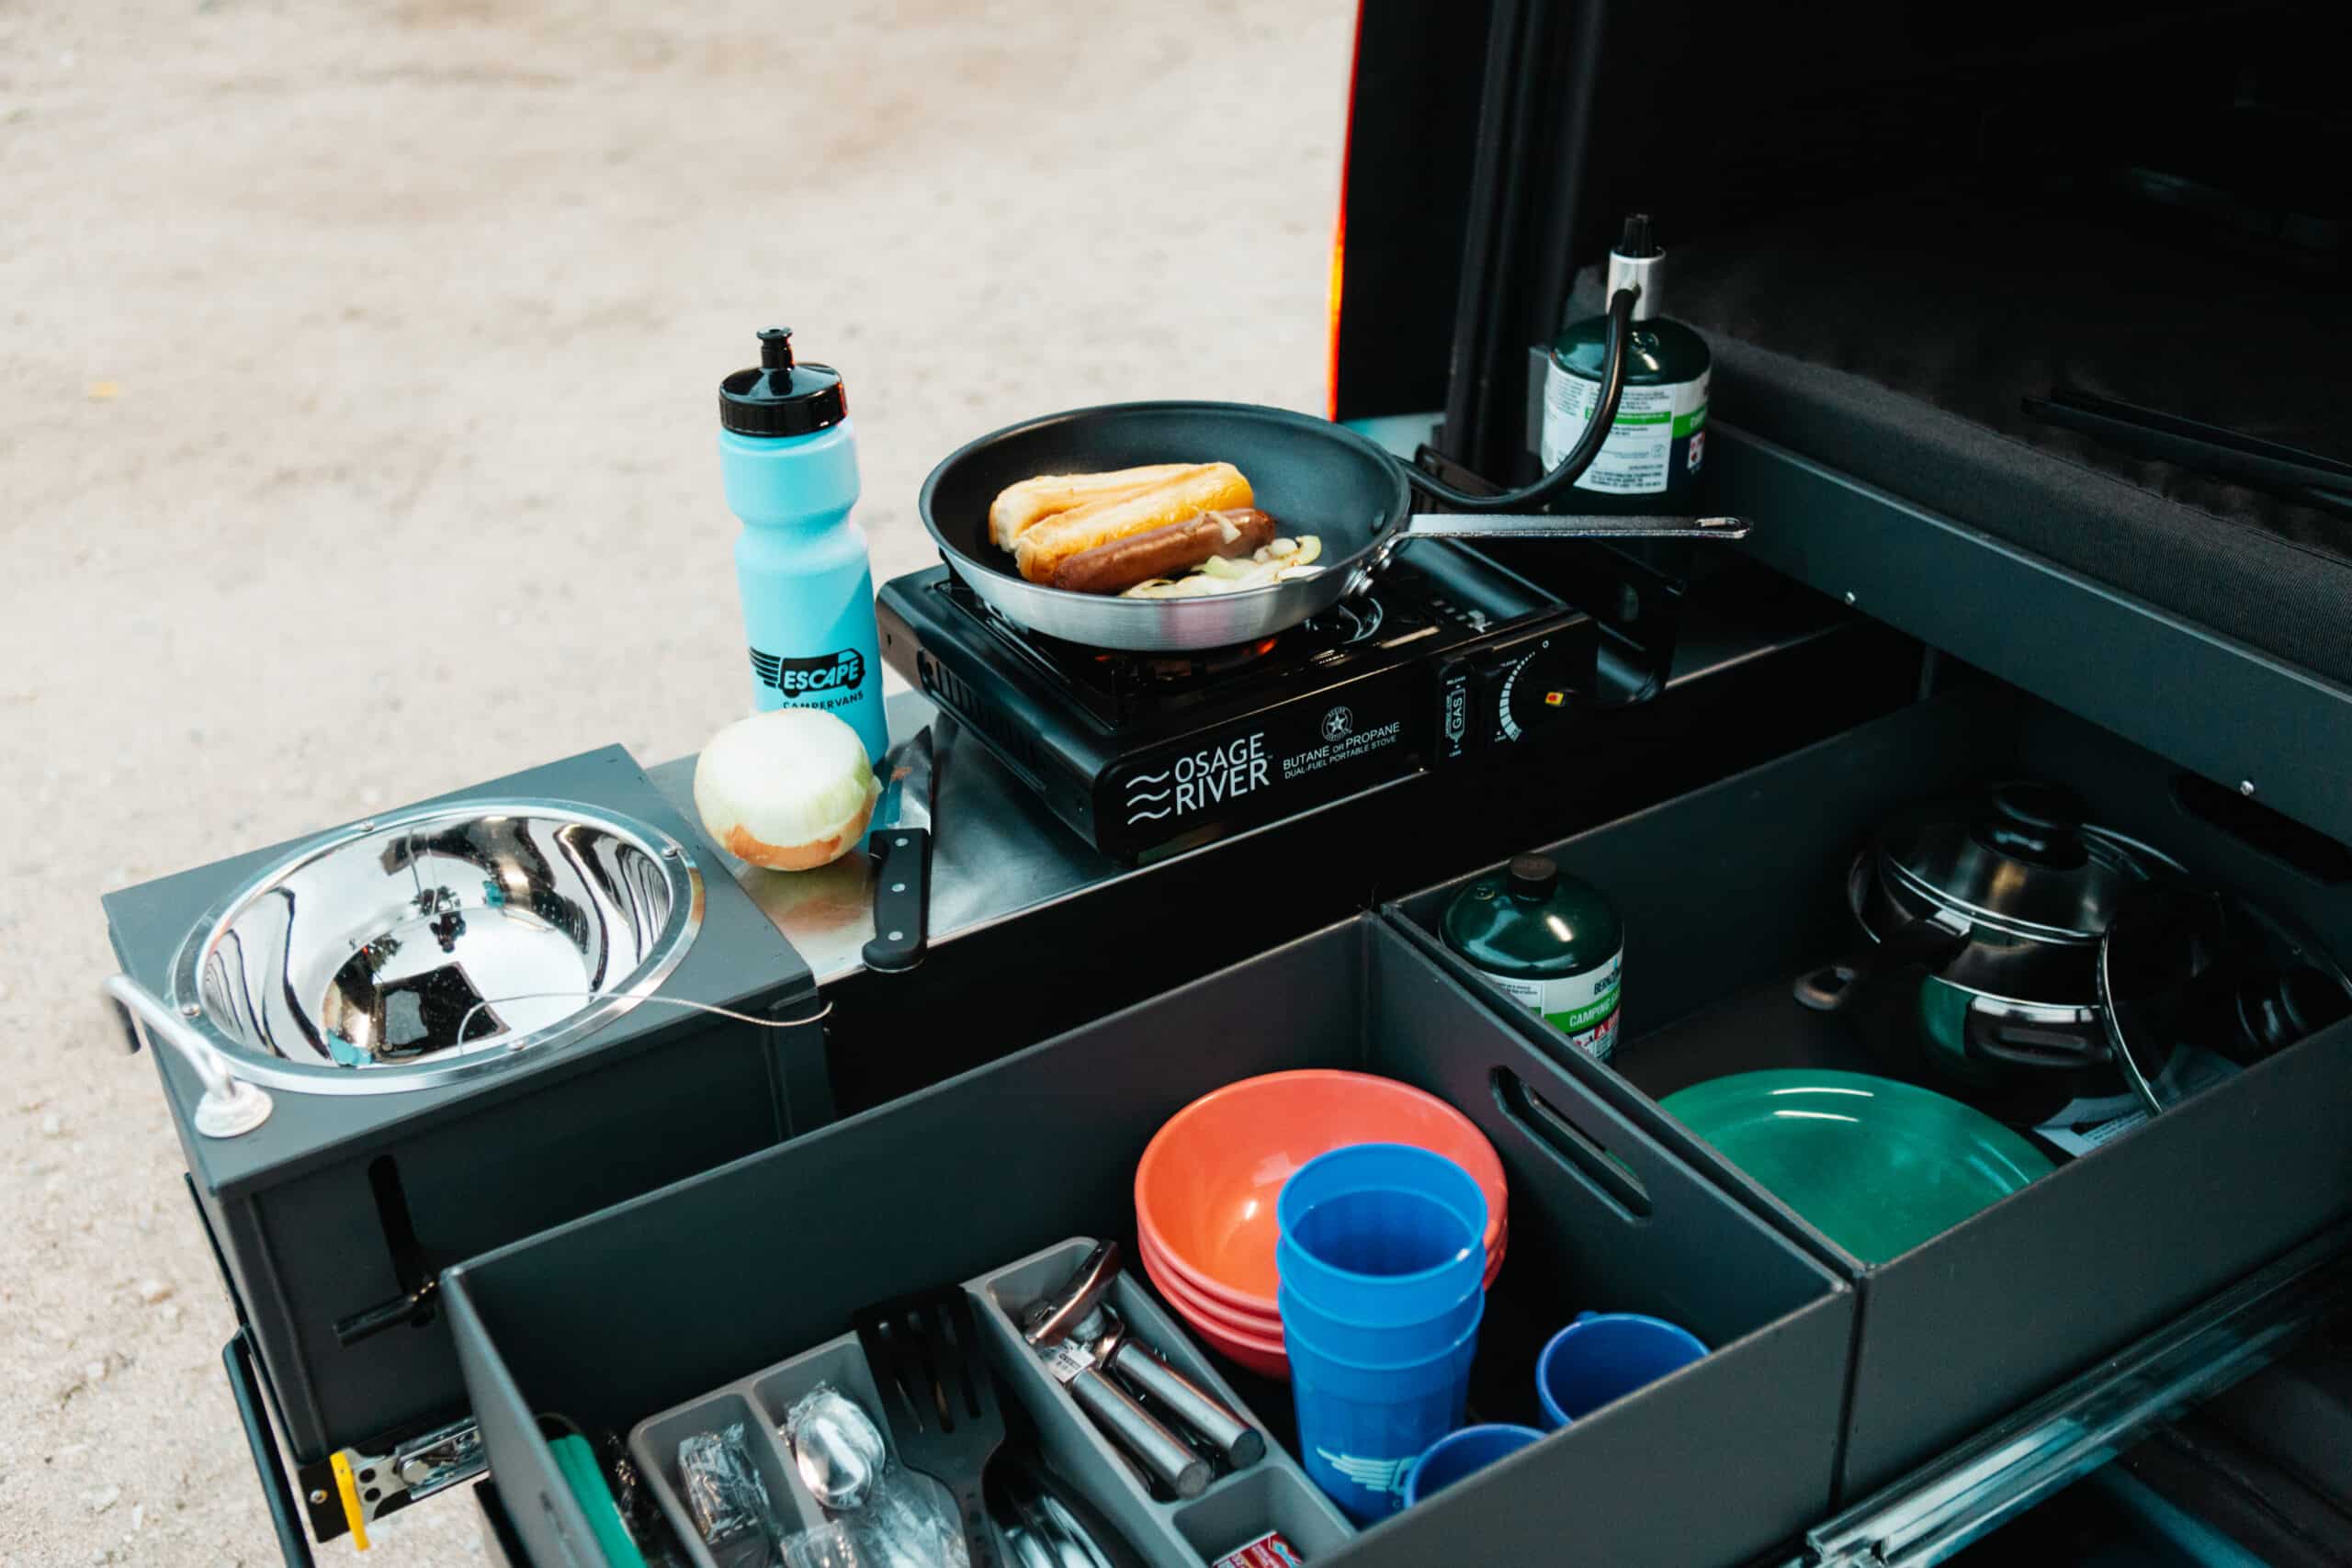 You can cook in the back of you Escape Camper Van on your California desert road trip.